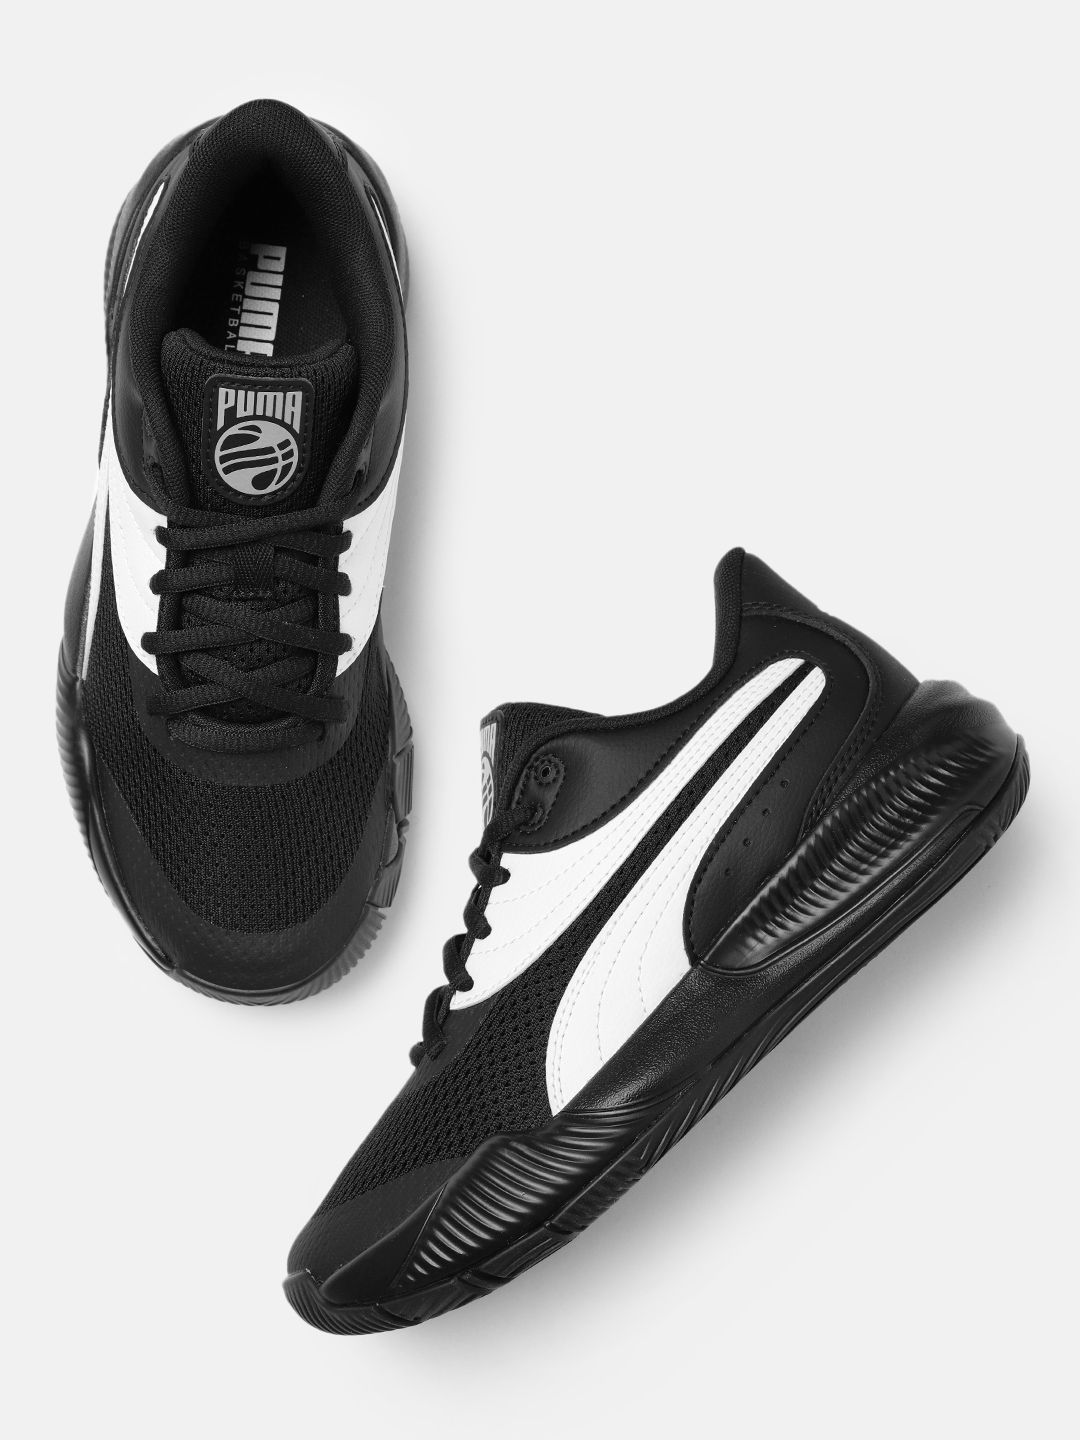 PUMA Hoops Men Triple Basketball Shoes Price in India